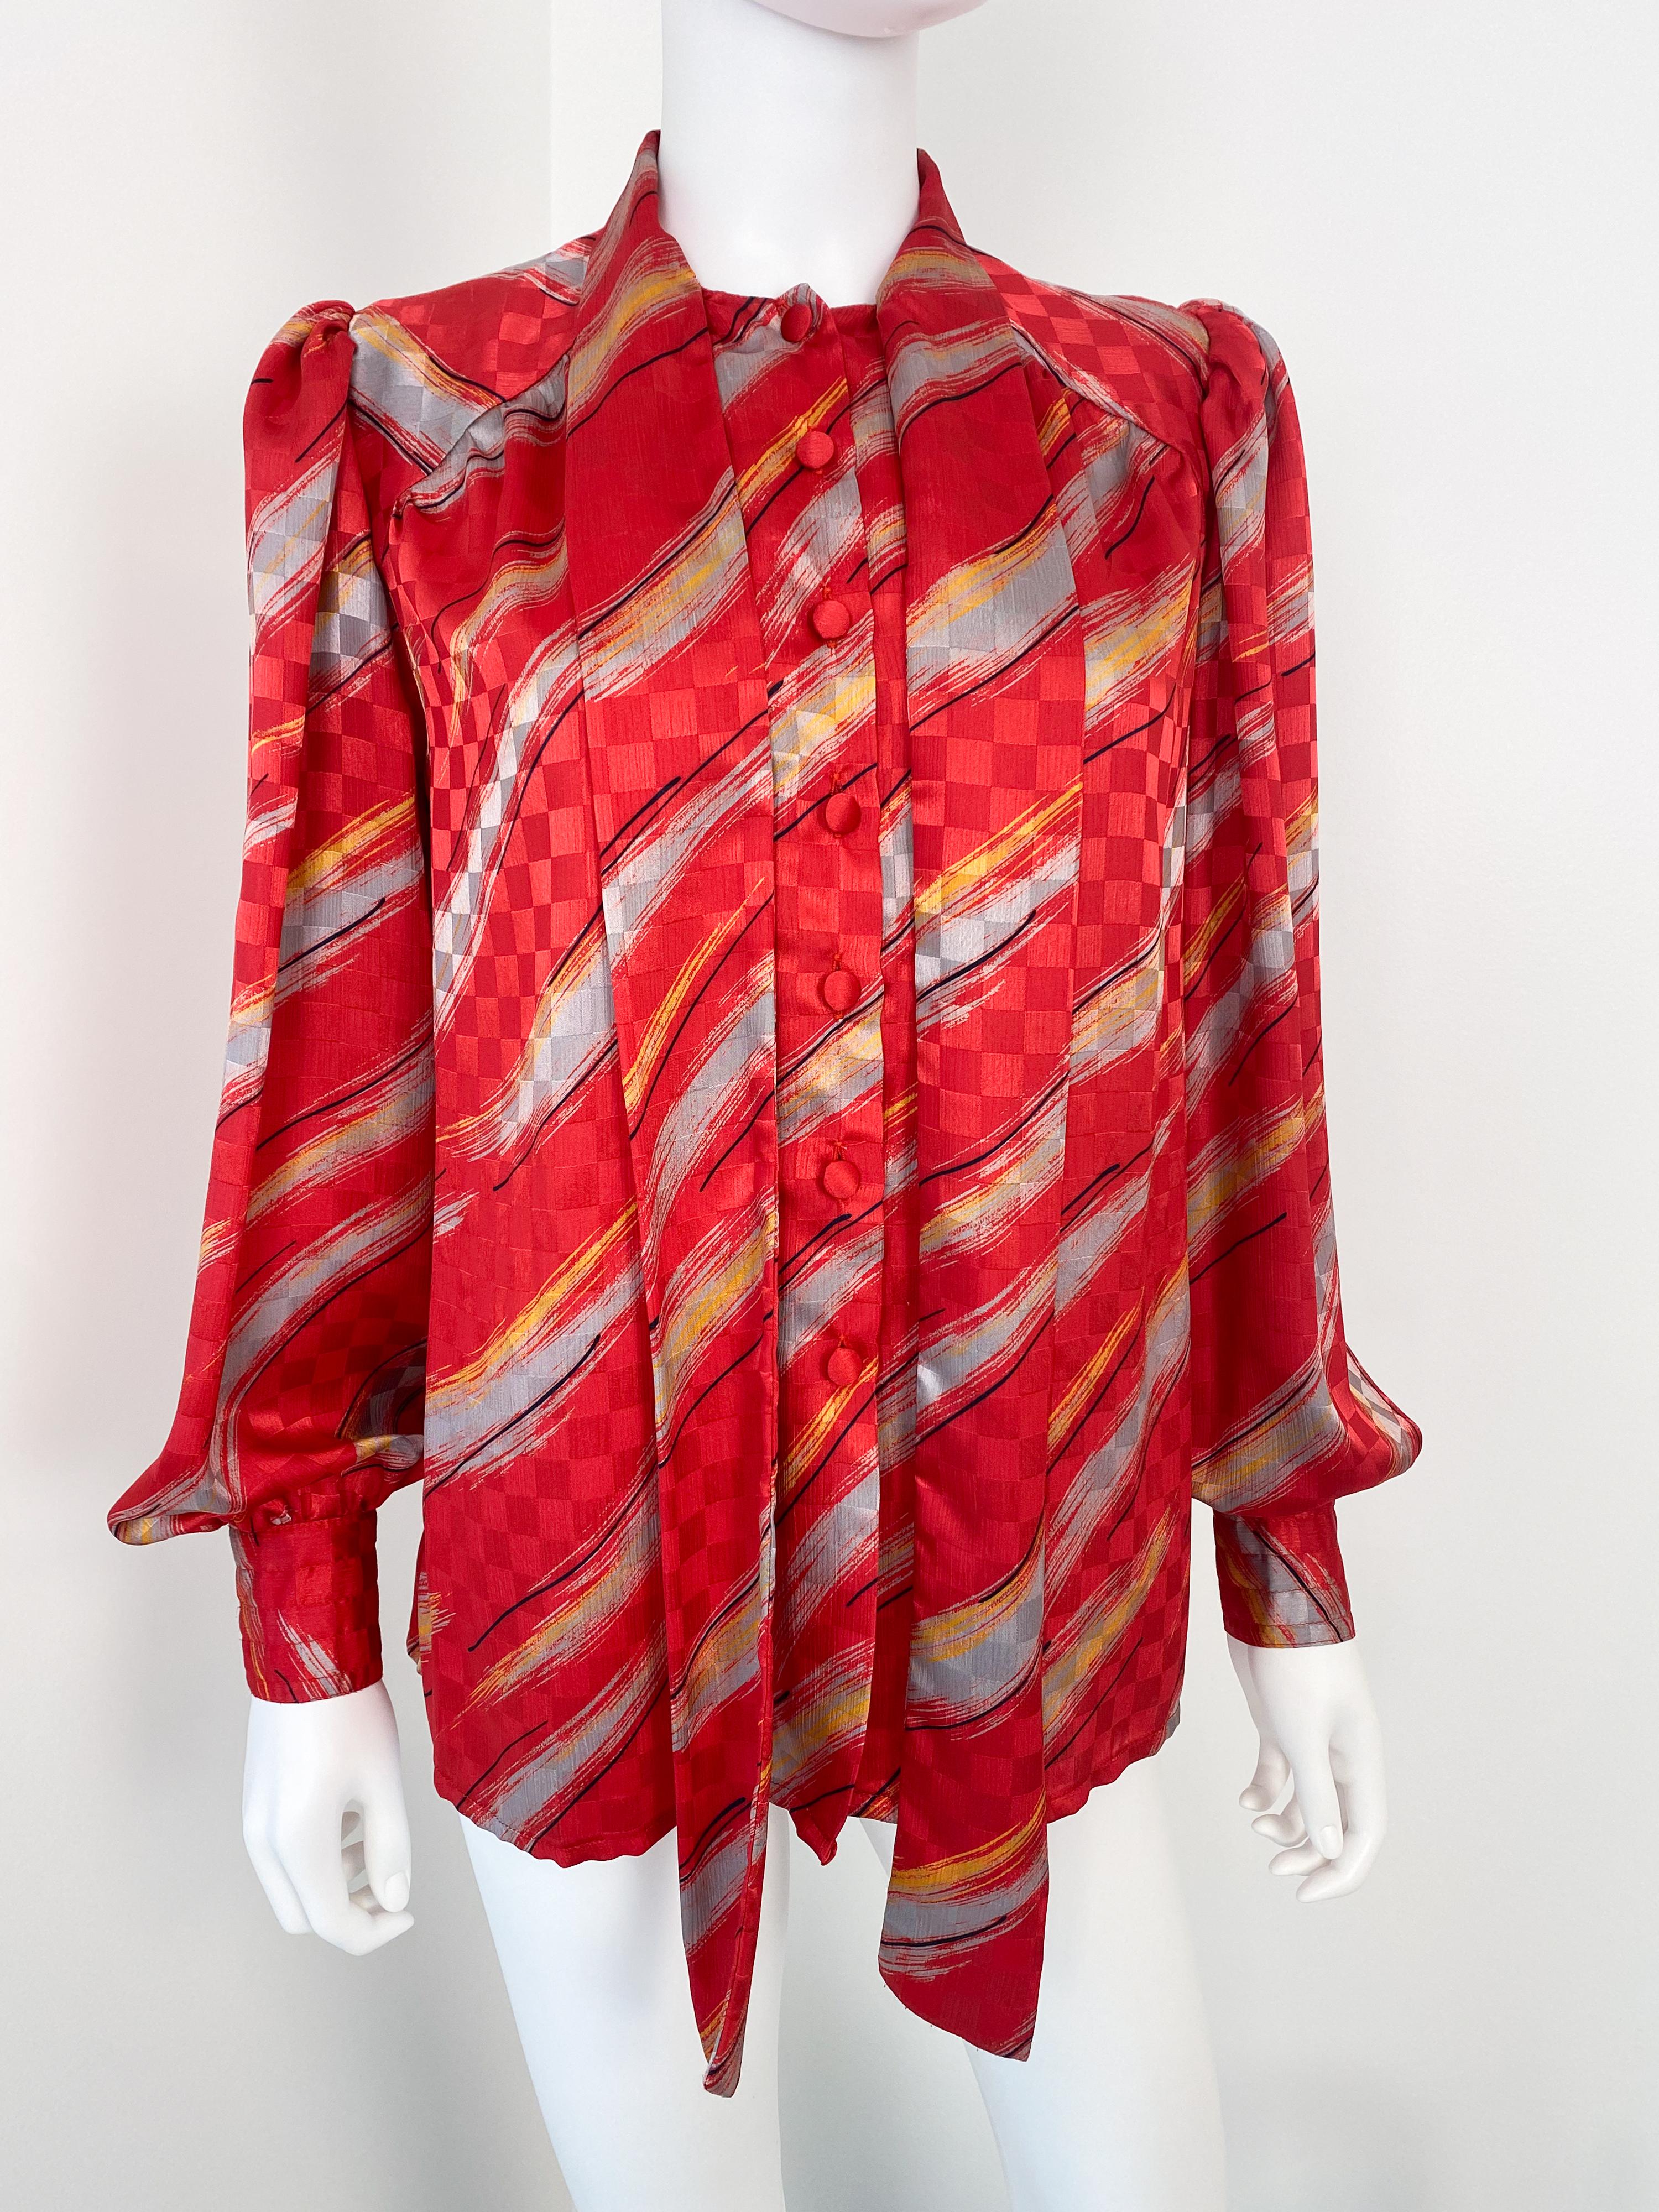 Vintage 1980s Silky Polyester Blouse Top Red and Gray Slashes Size 10/12 In Excellent Condition For Sale In Atlanta, GA